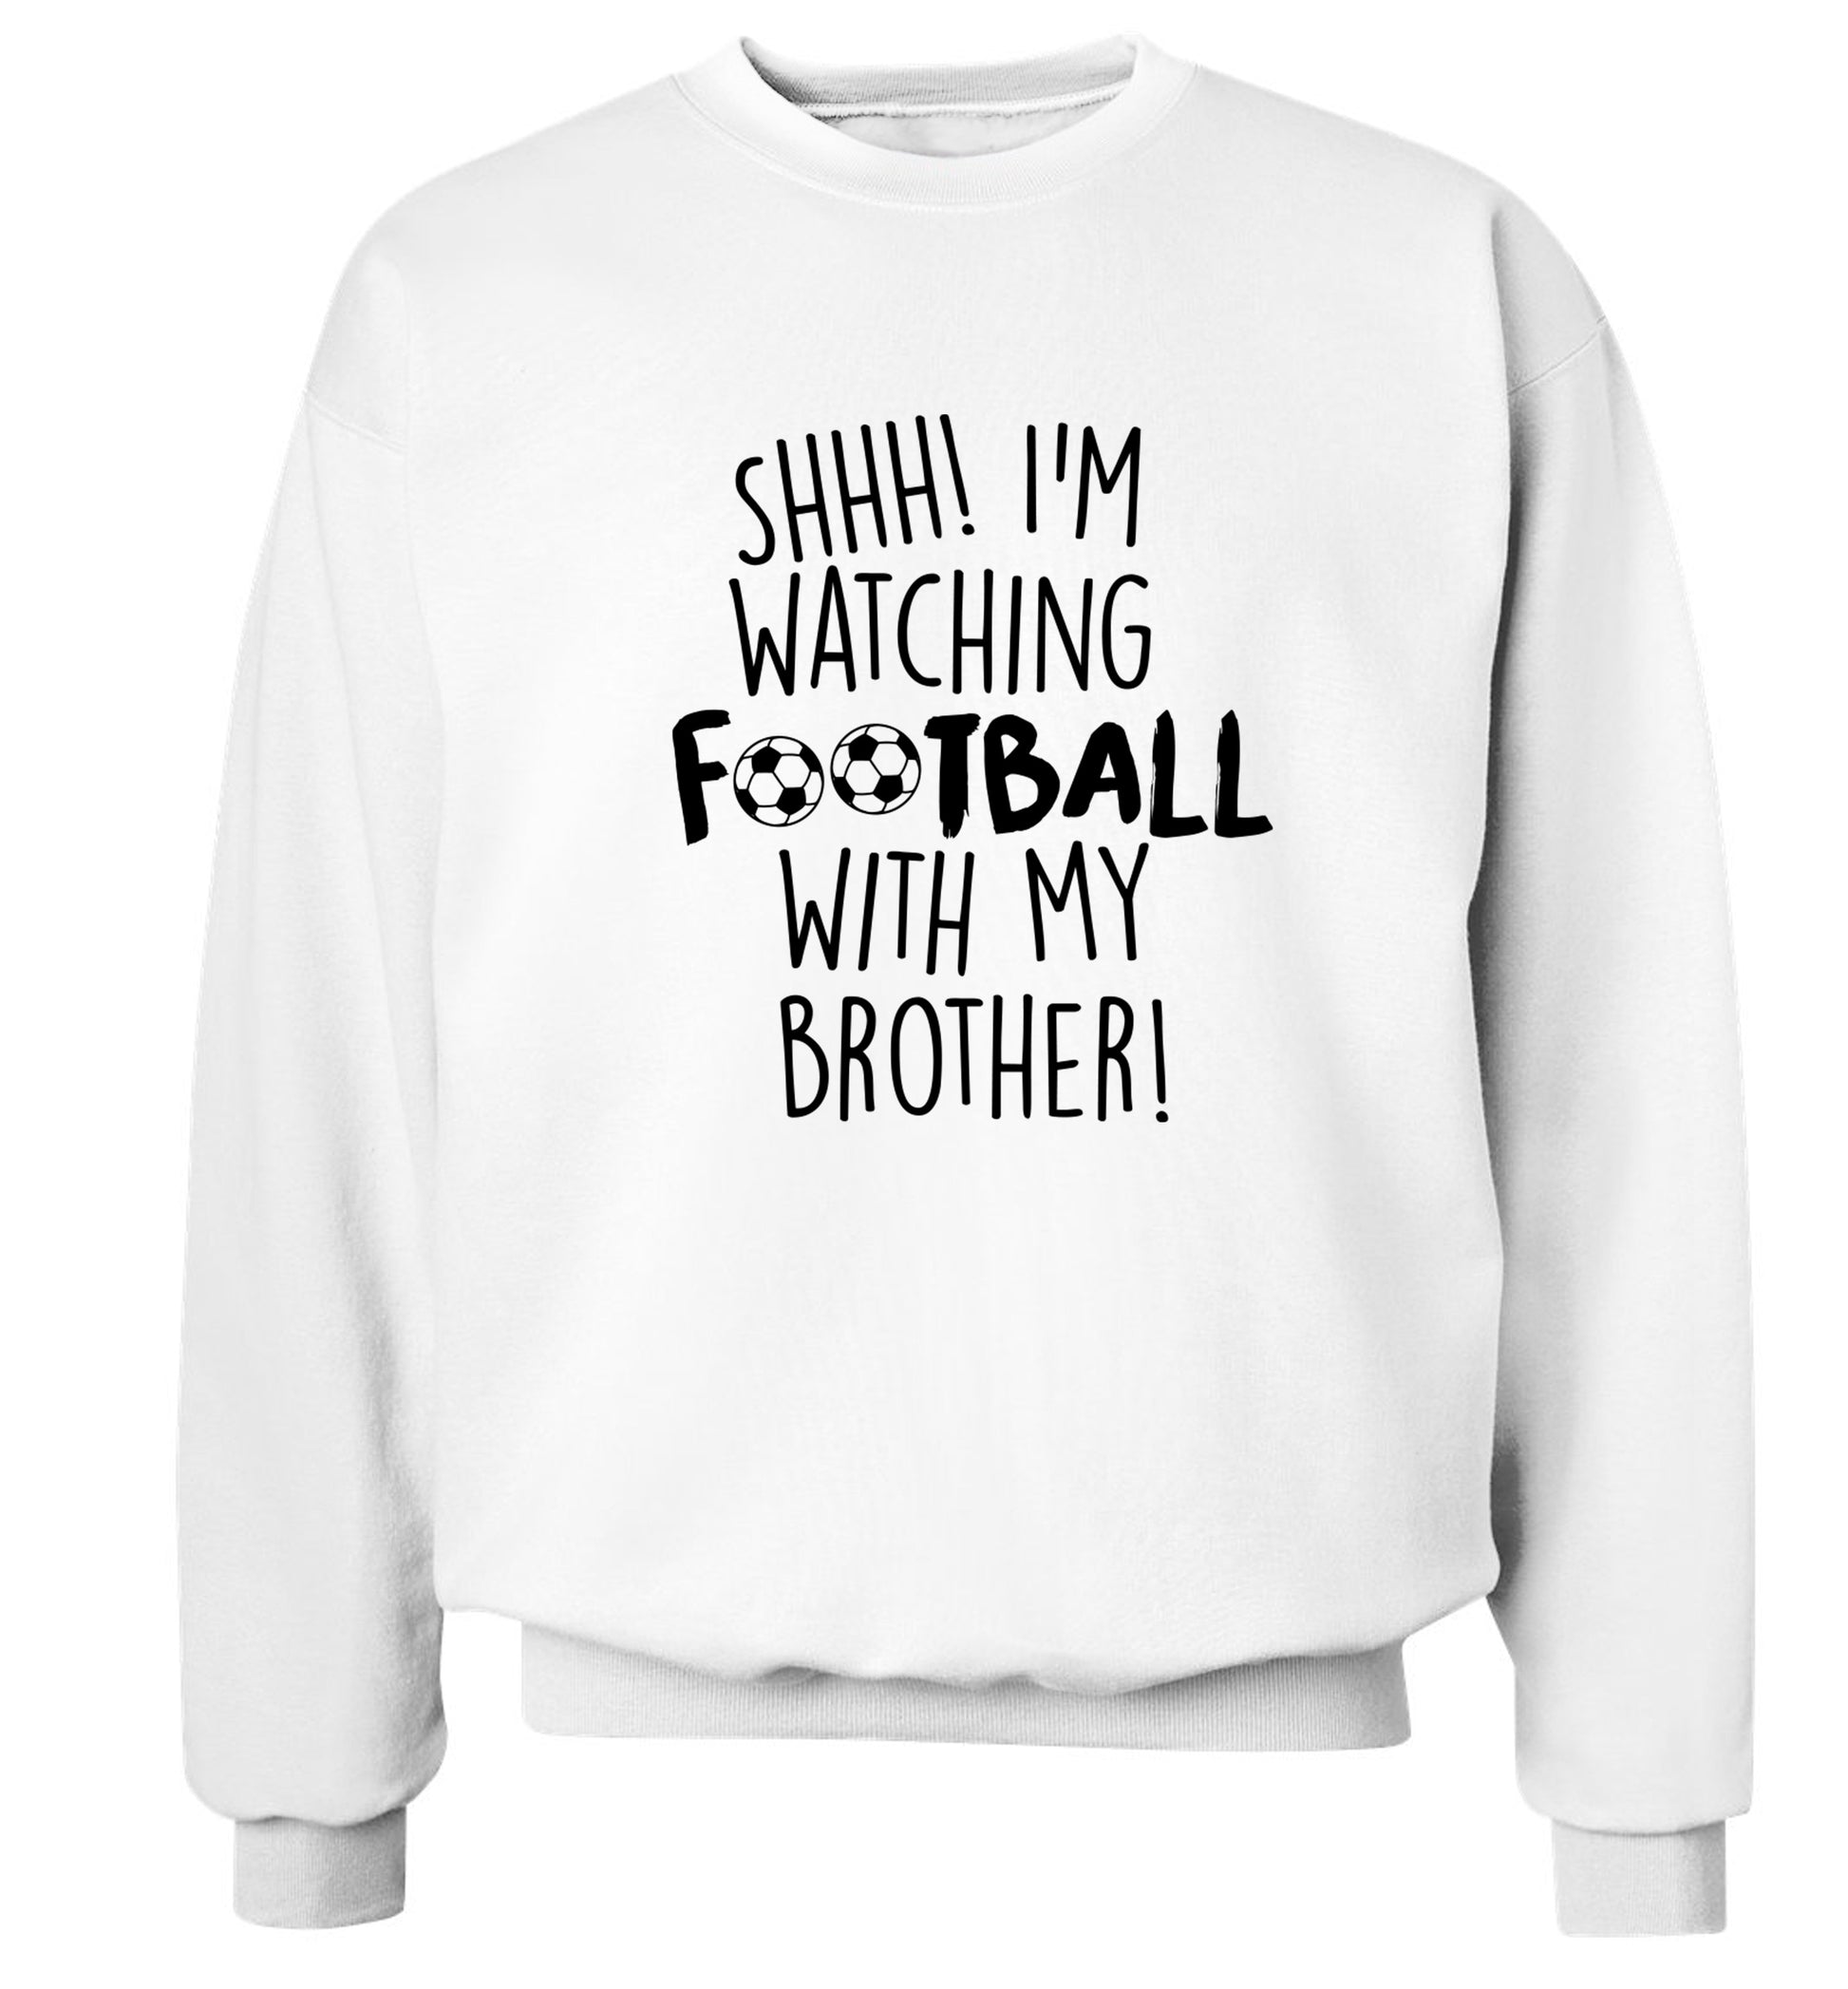 Shhh I'm watching football with my brother Adult's unisexwhite Sweater 2XL